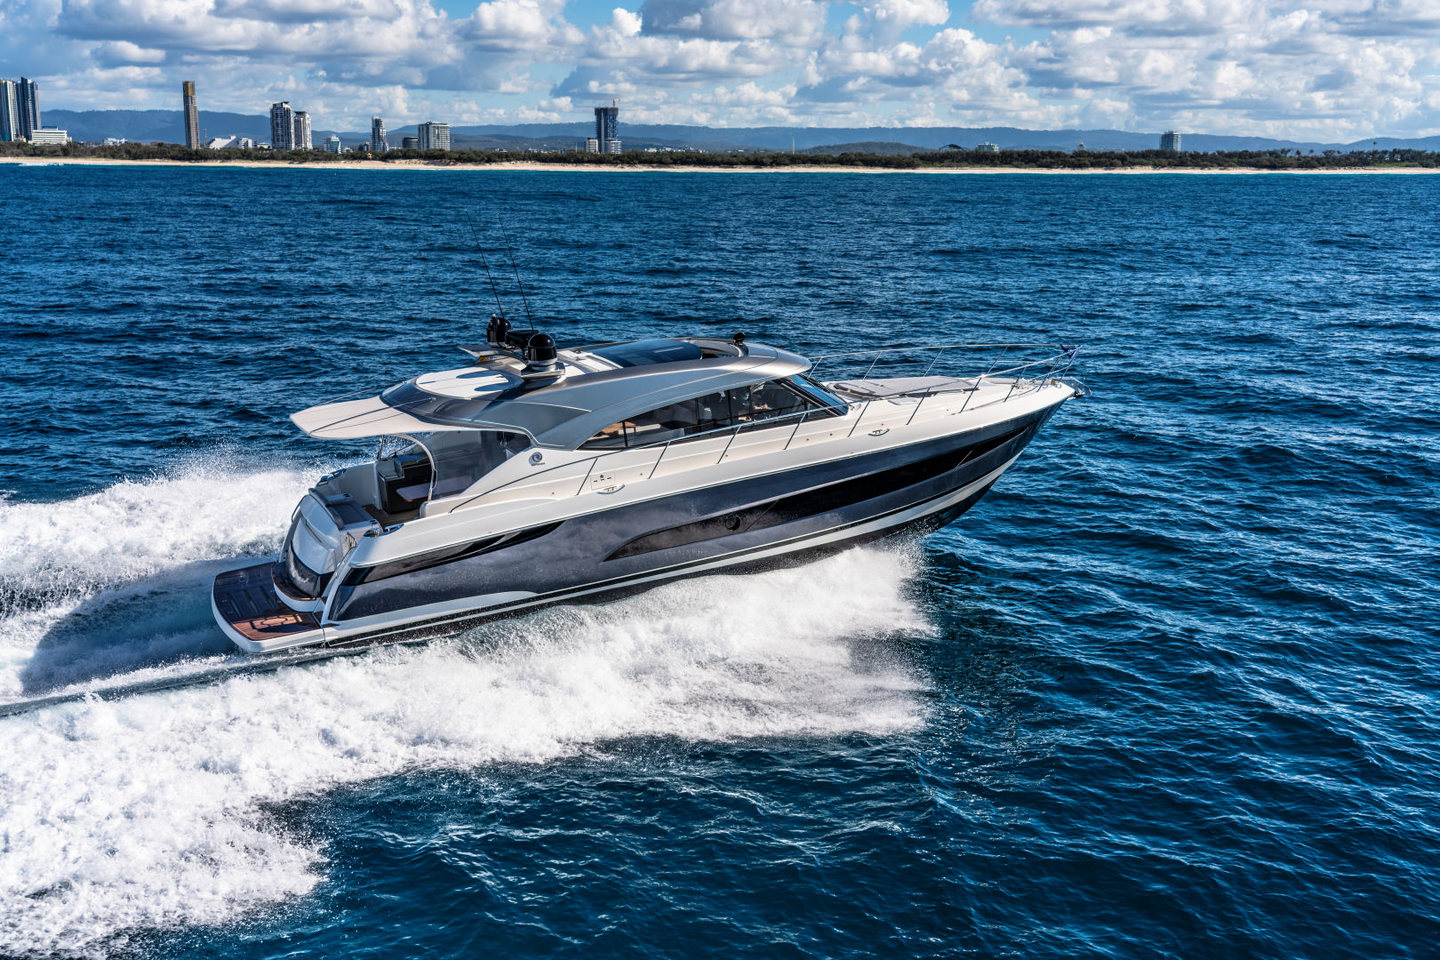 360 VR Virtual Tours of the Riviera 5400 Sport Yacht